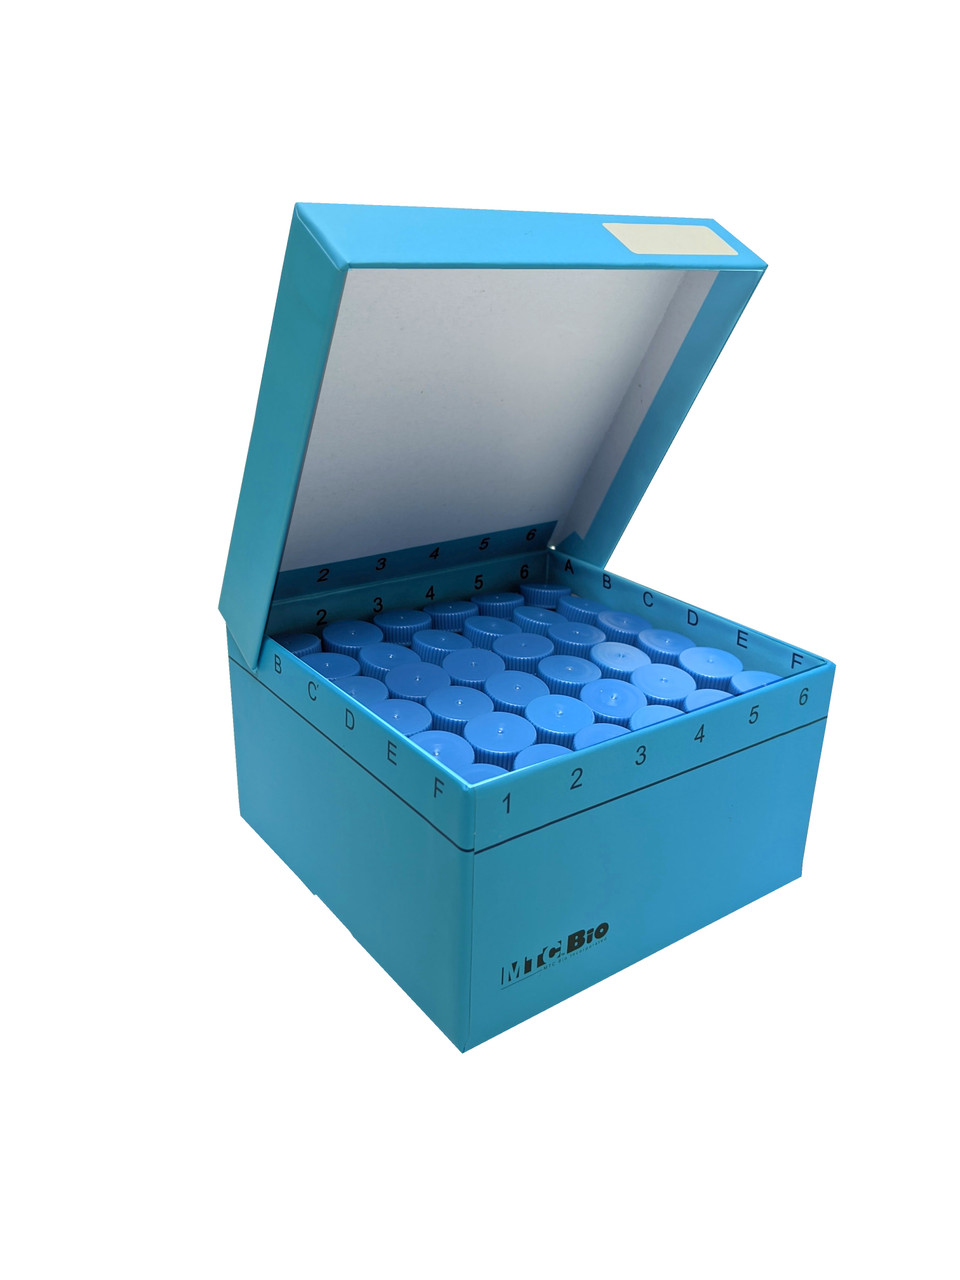 https://cdn11.bigcommerce.com/s-w9bdixgj/images/stencil/1280x1280/products/3615/8156/MTCBio_C2580-36_Cardboard_CryoBox_with_Attached_Hinged_Lid_for_36_Five-O_5mL_Screw_Cap_Tubes_-_Freezer_Boxes_-_Stellar_Scientific__20186.1604526108.jpg?c=2